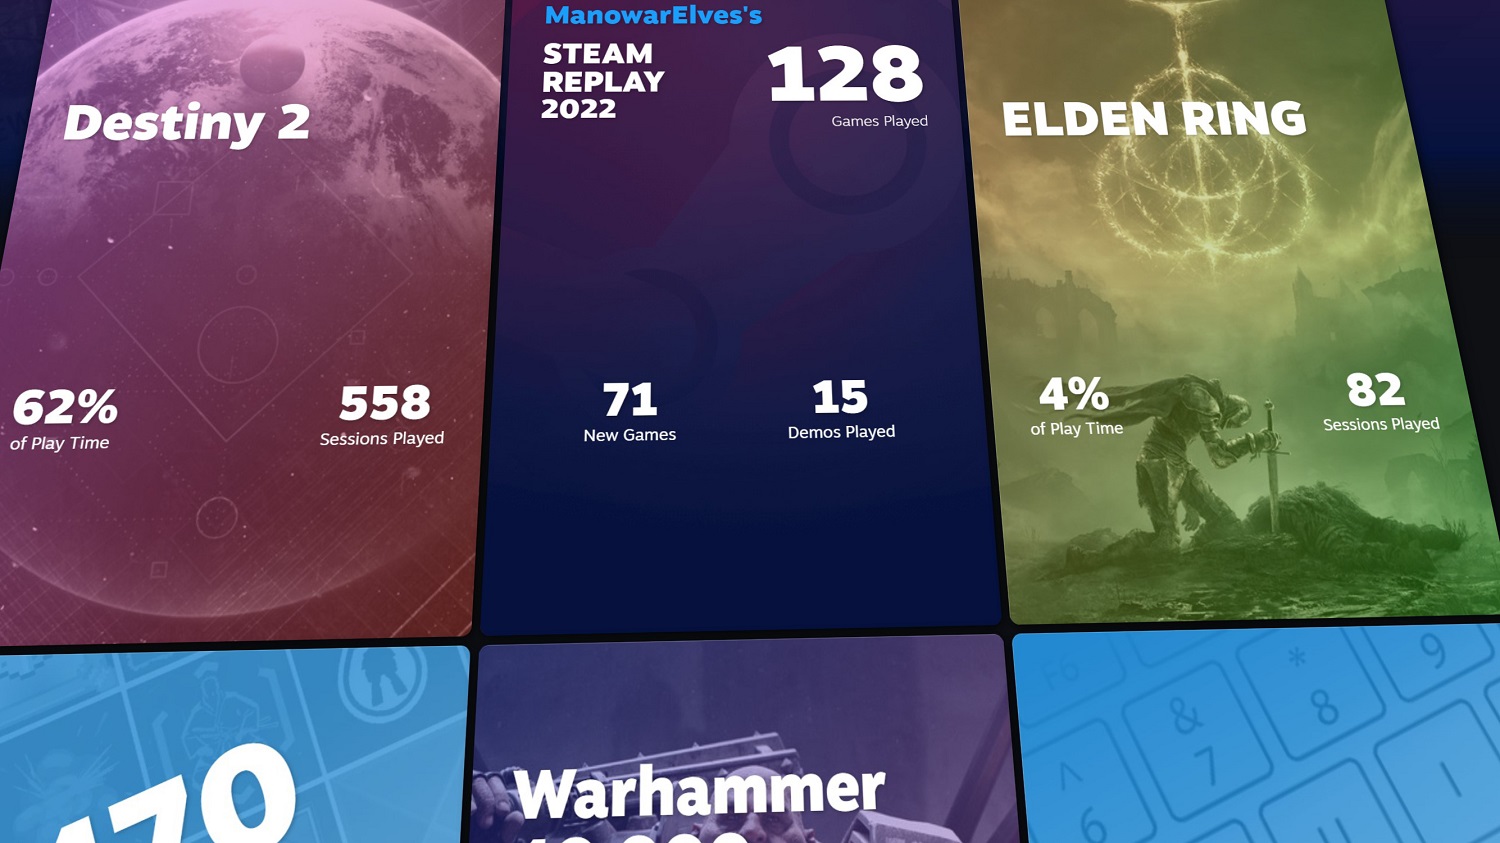 Steam Usage and Catalog Stats for 2023